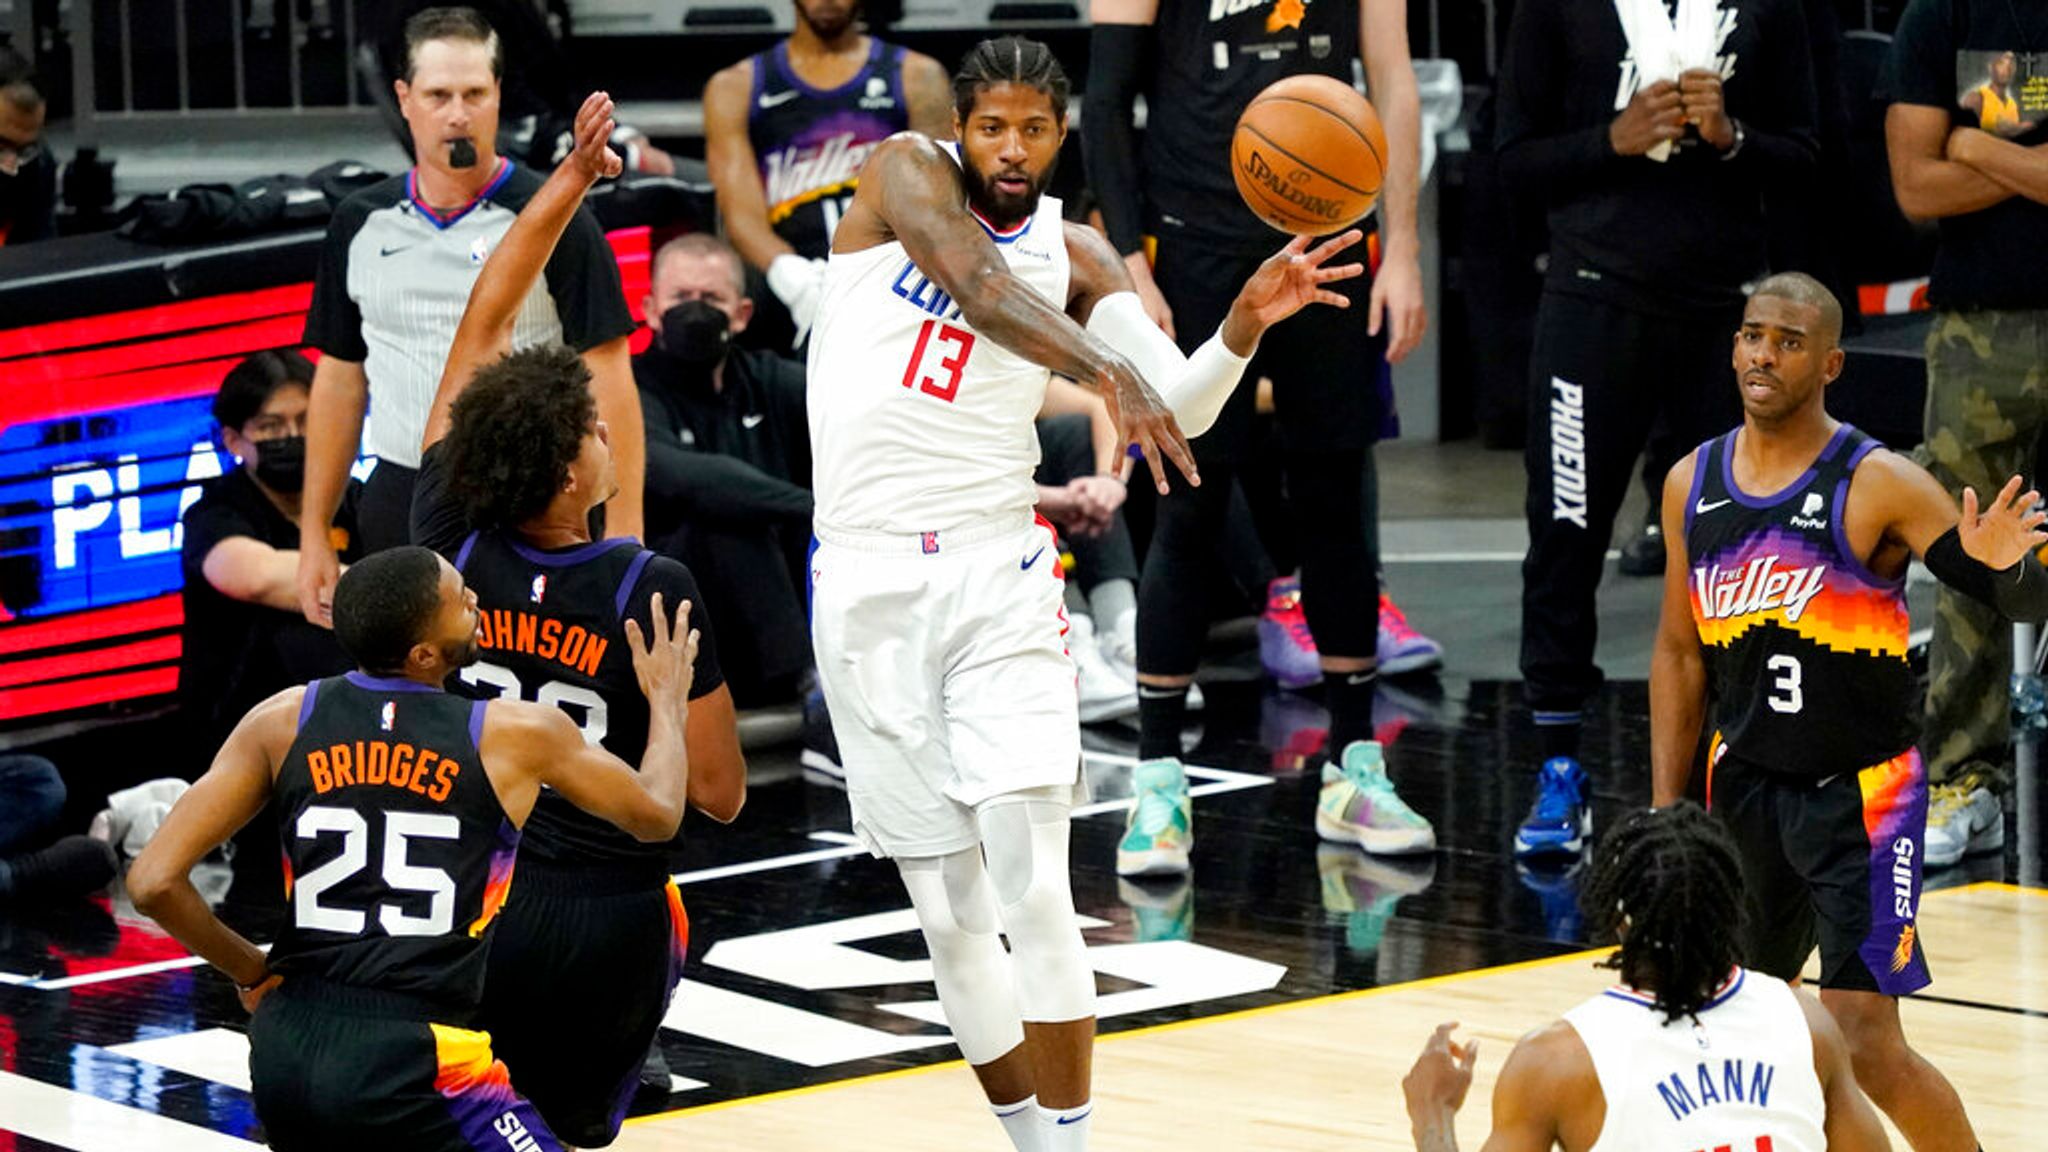 PG drops 41 as Clippers fight back | NBA News | Sky Sports